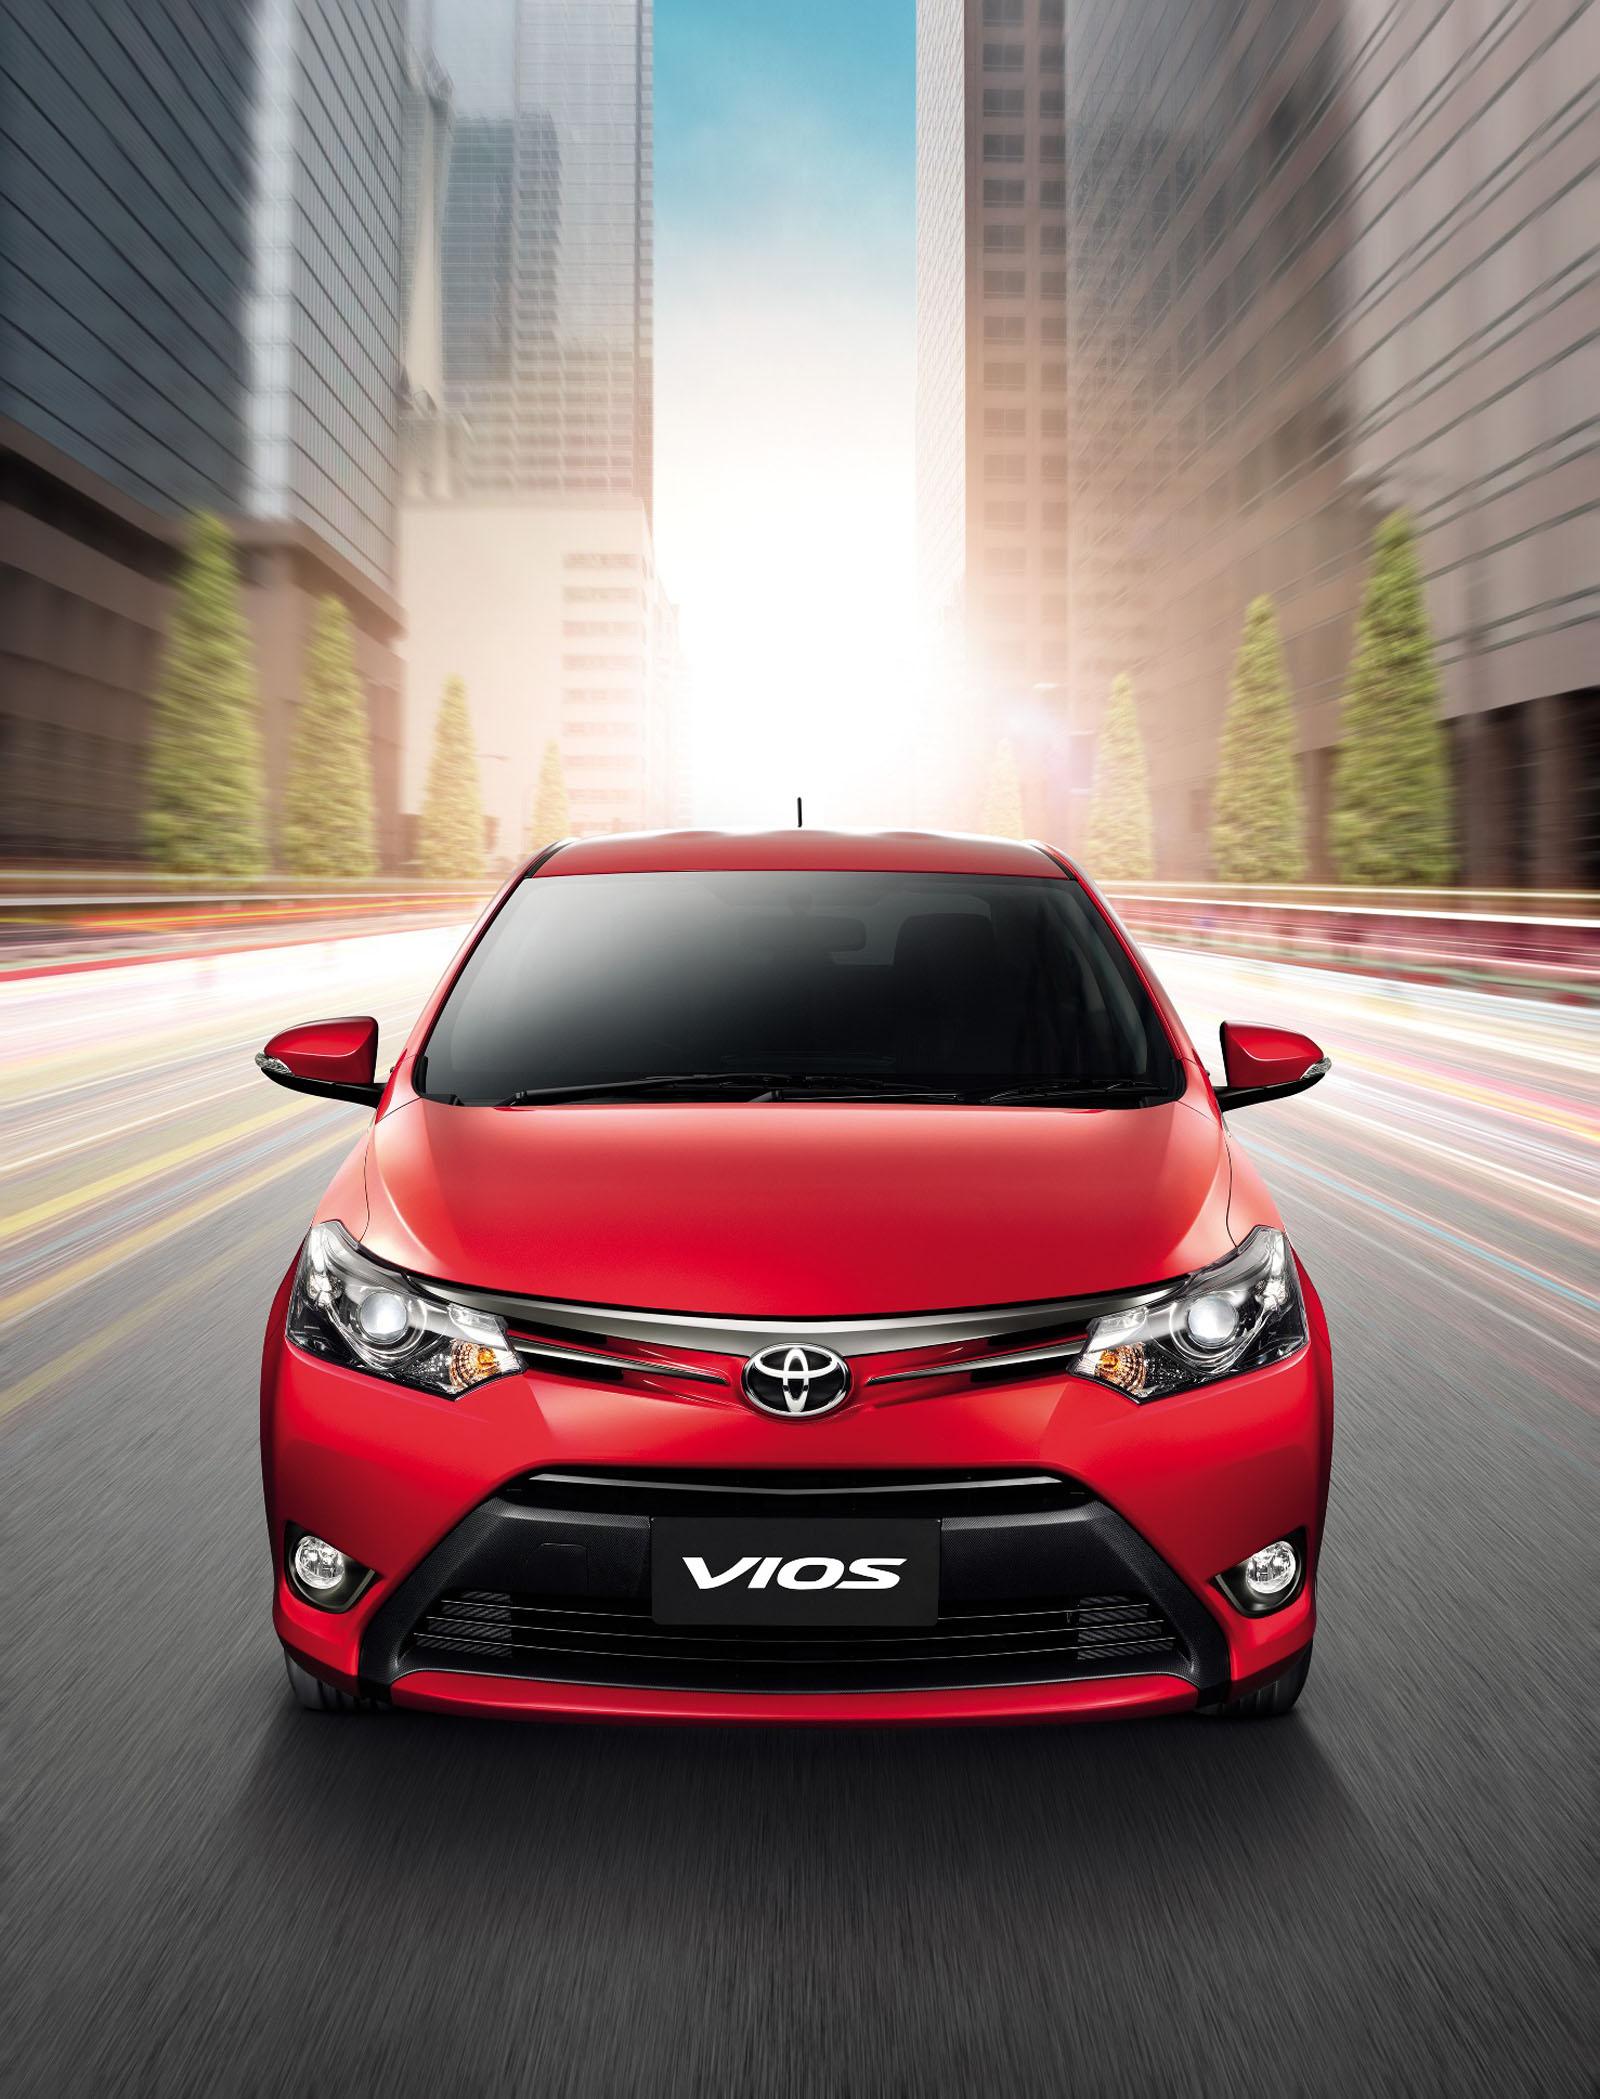 Toyota Vios 2014 photo 96234 picture at high resolution